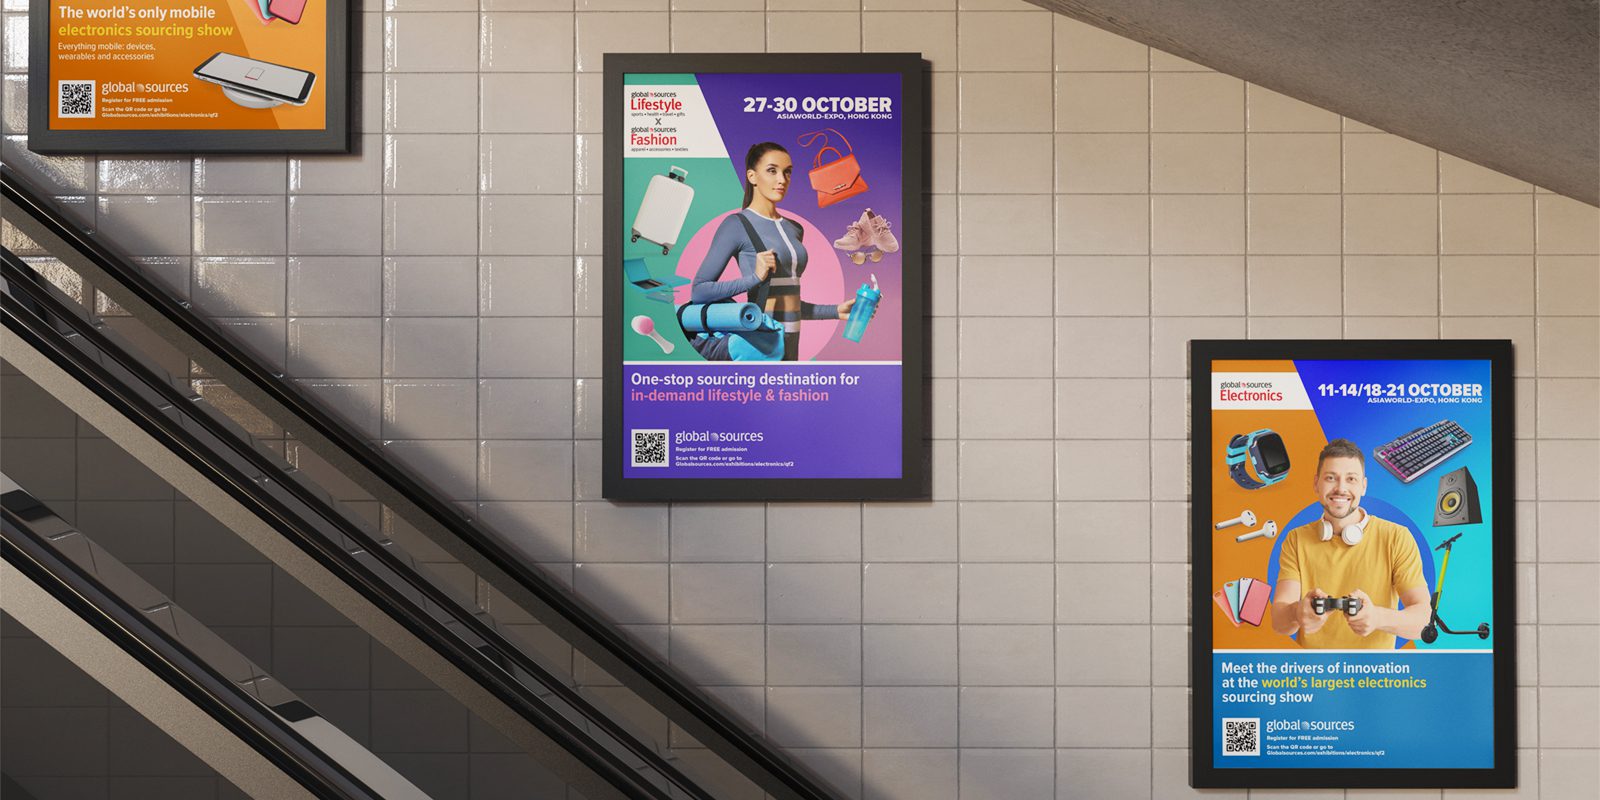 Global Souces Marketing Campaign 3 Portrait Poster Design Next to Escalator in Underground Station